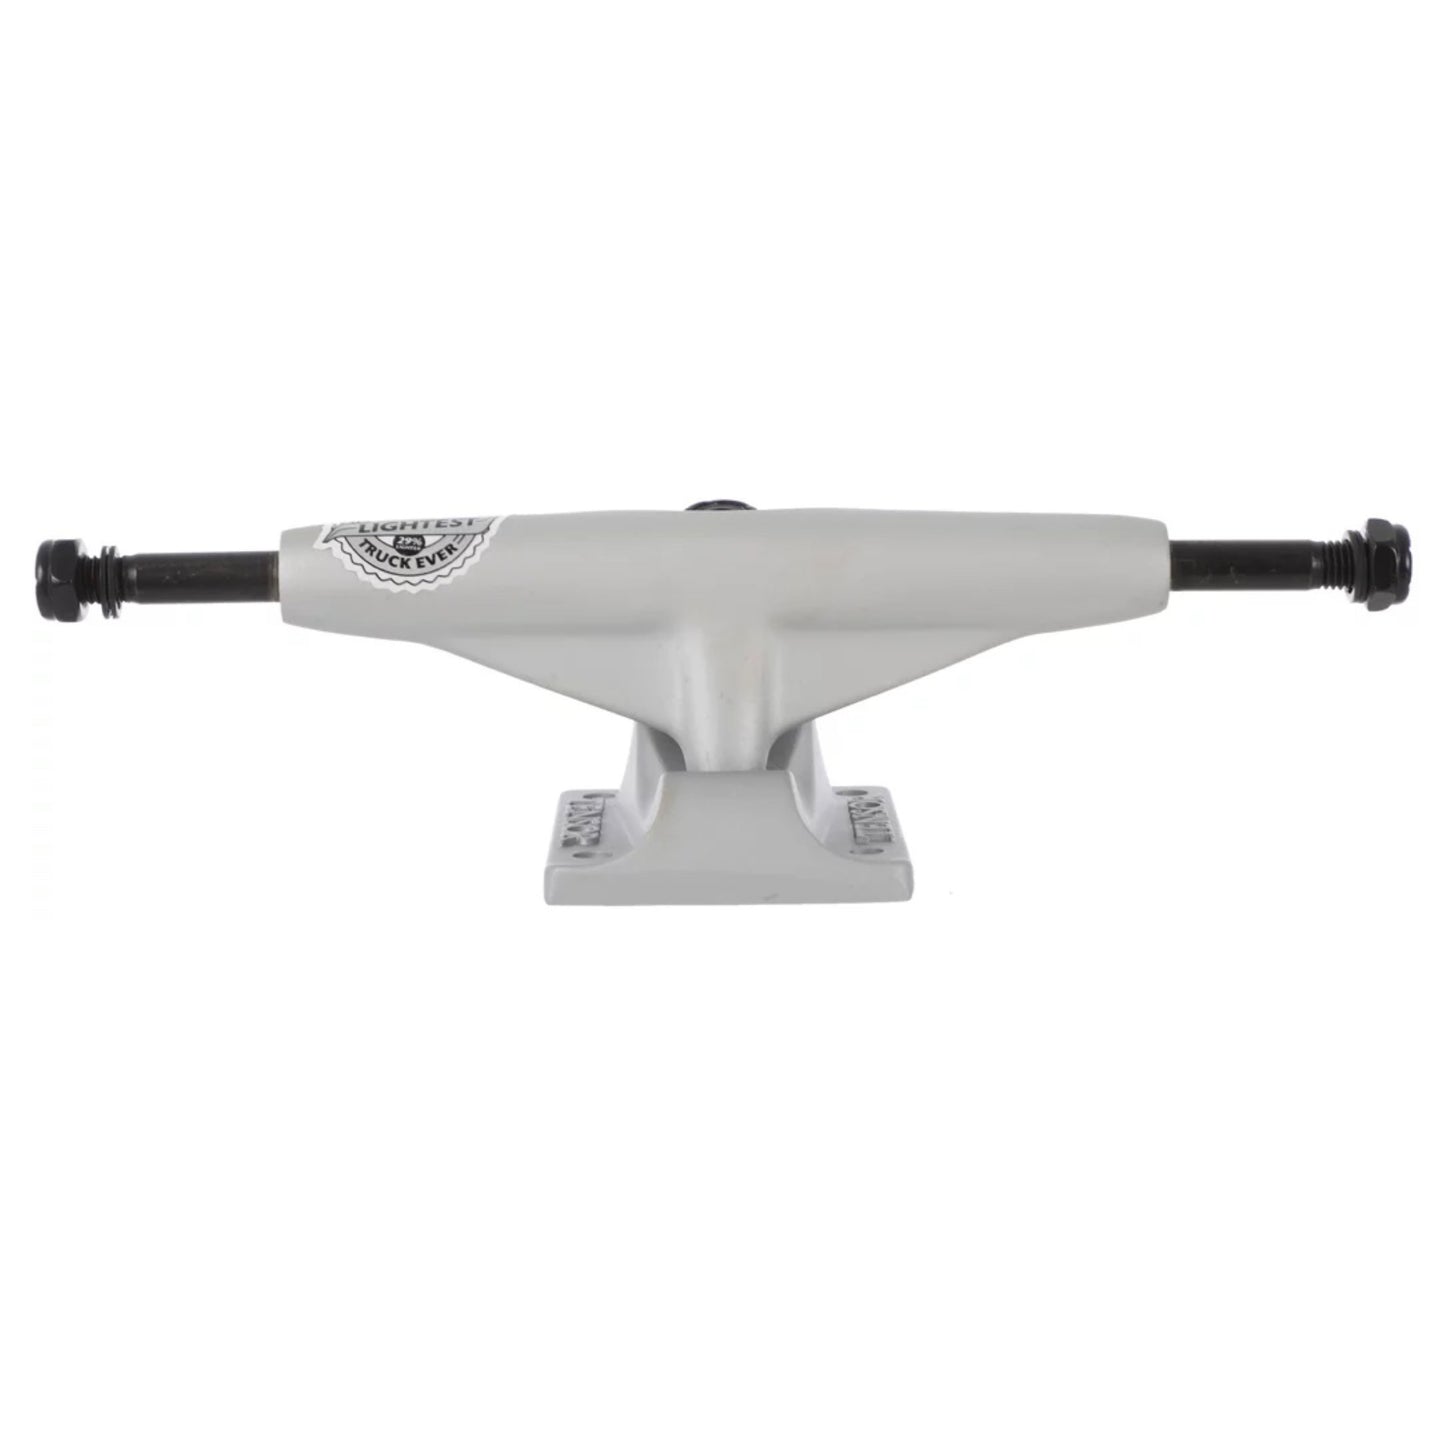 Tensor Mag Light Skateboard Trucks; Silver color for a sleek and classic look; Lightweight construction for enhanced performance and maneuverability; Mag Light technology provides a strong and durable truck;